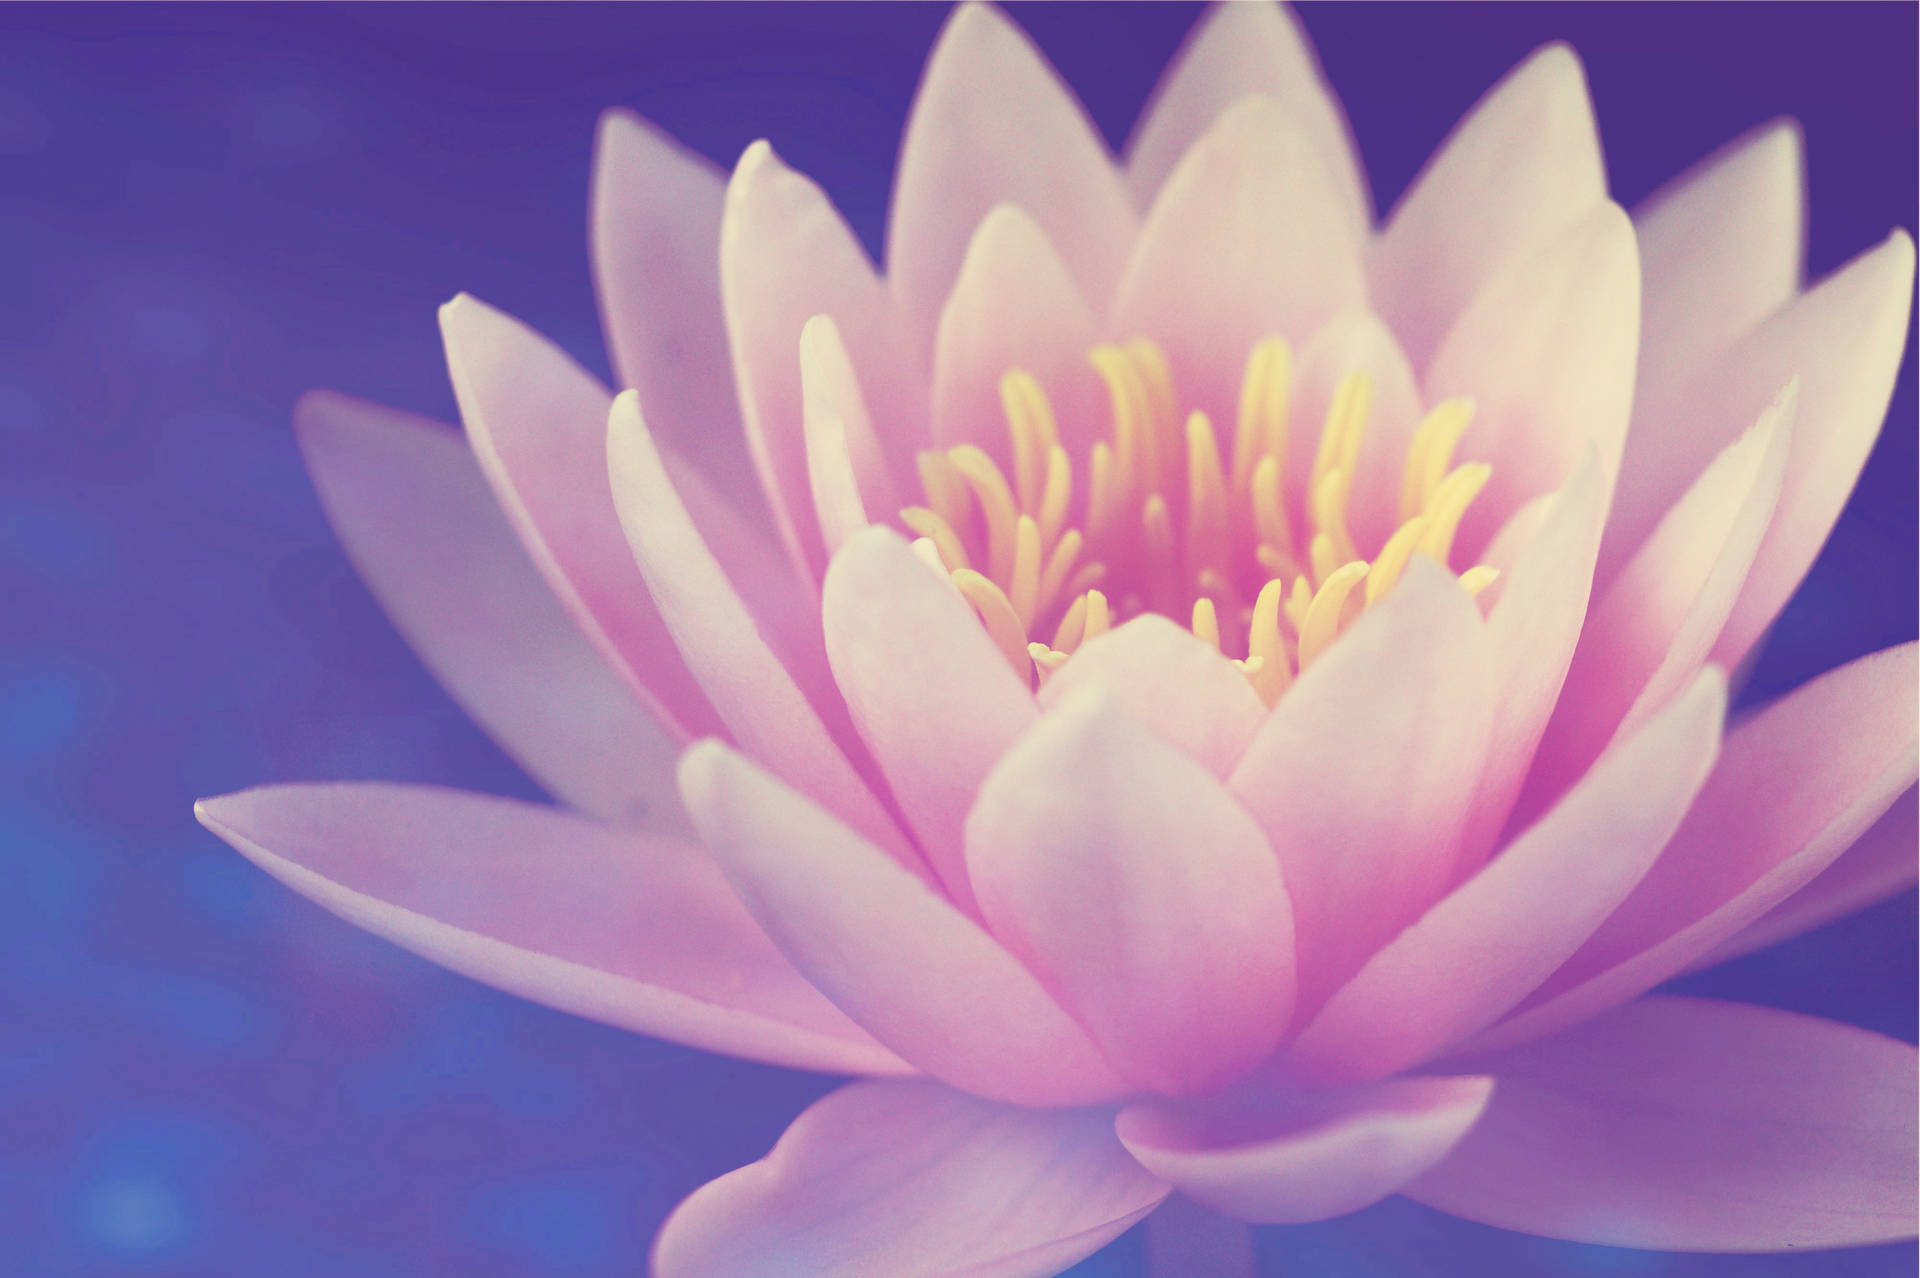 Lotus Flower 4592X3056 Wallpaper and Background Image